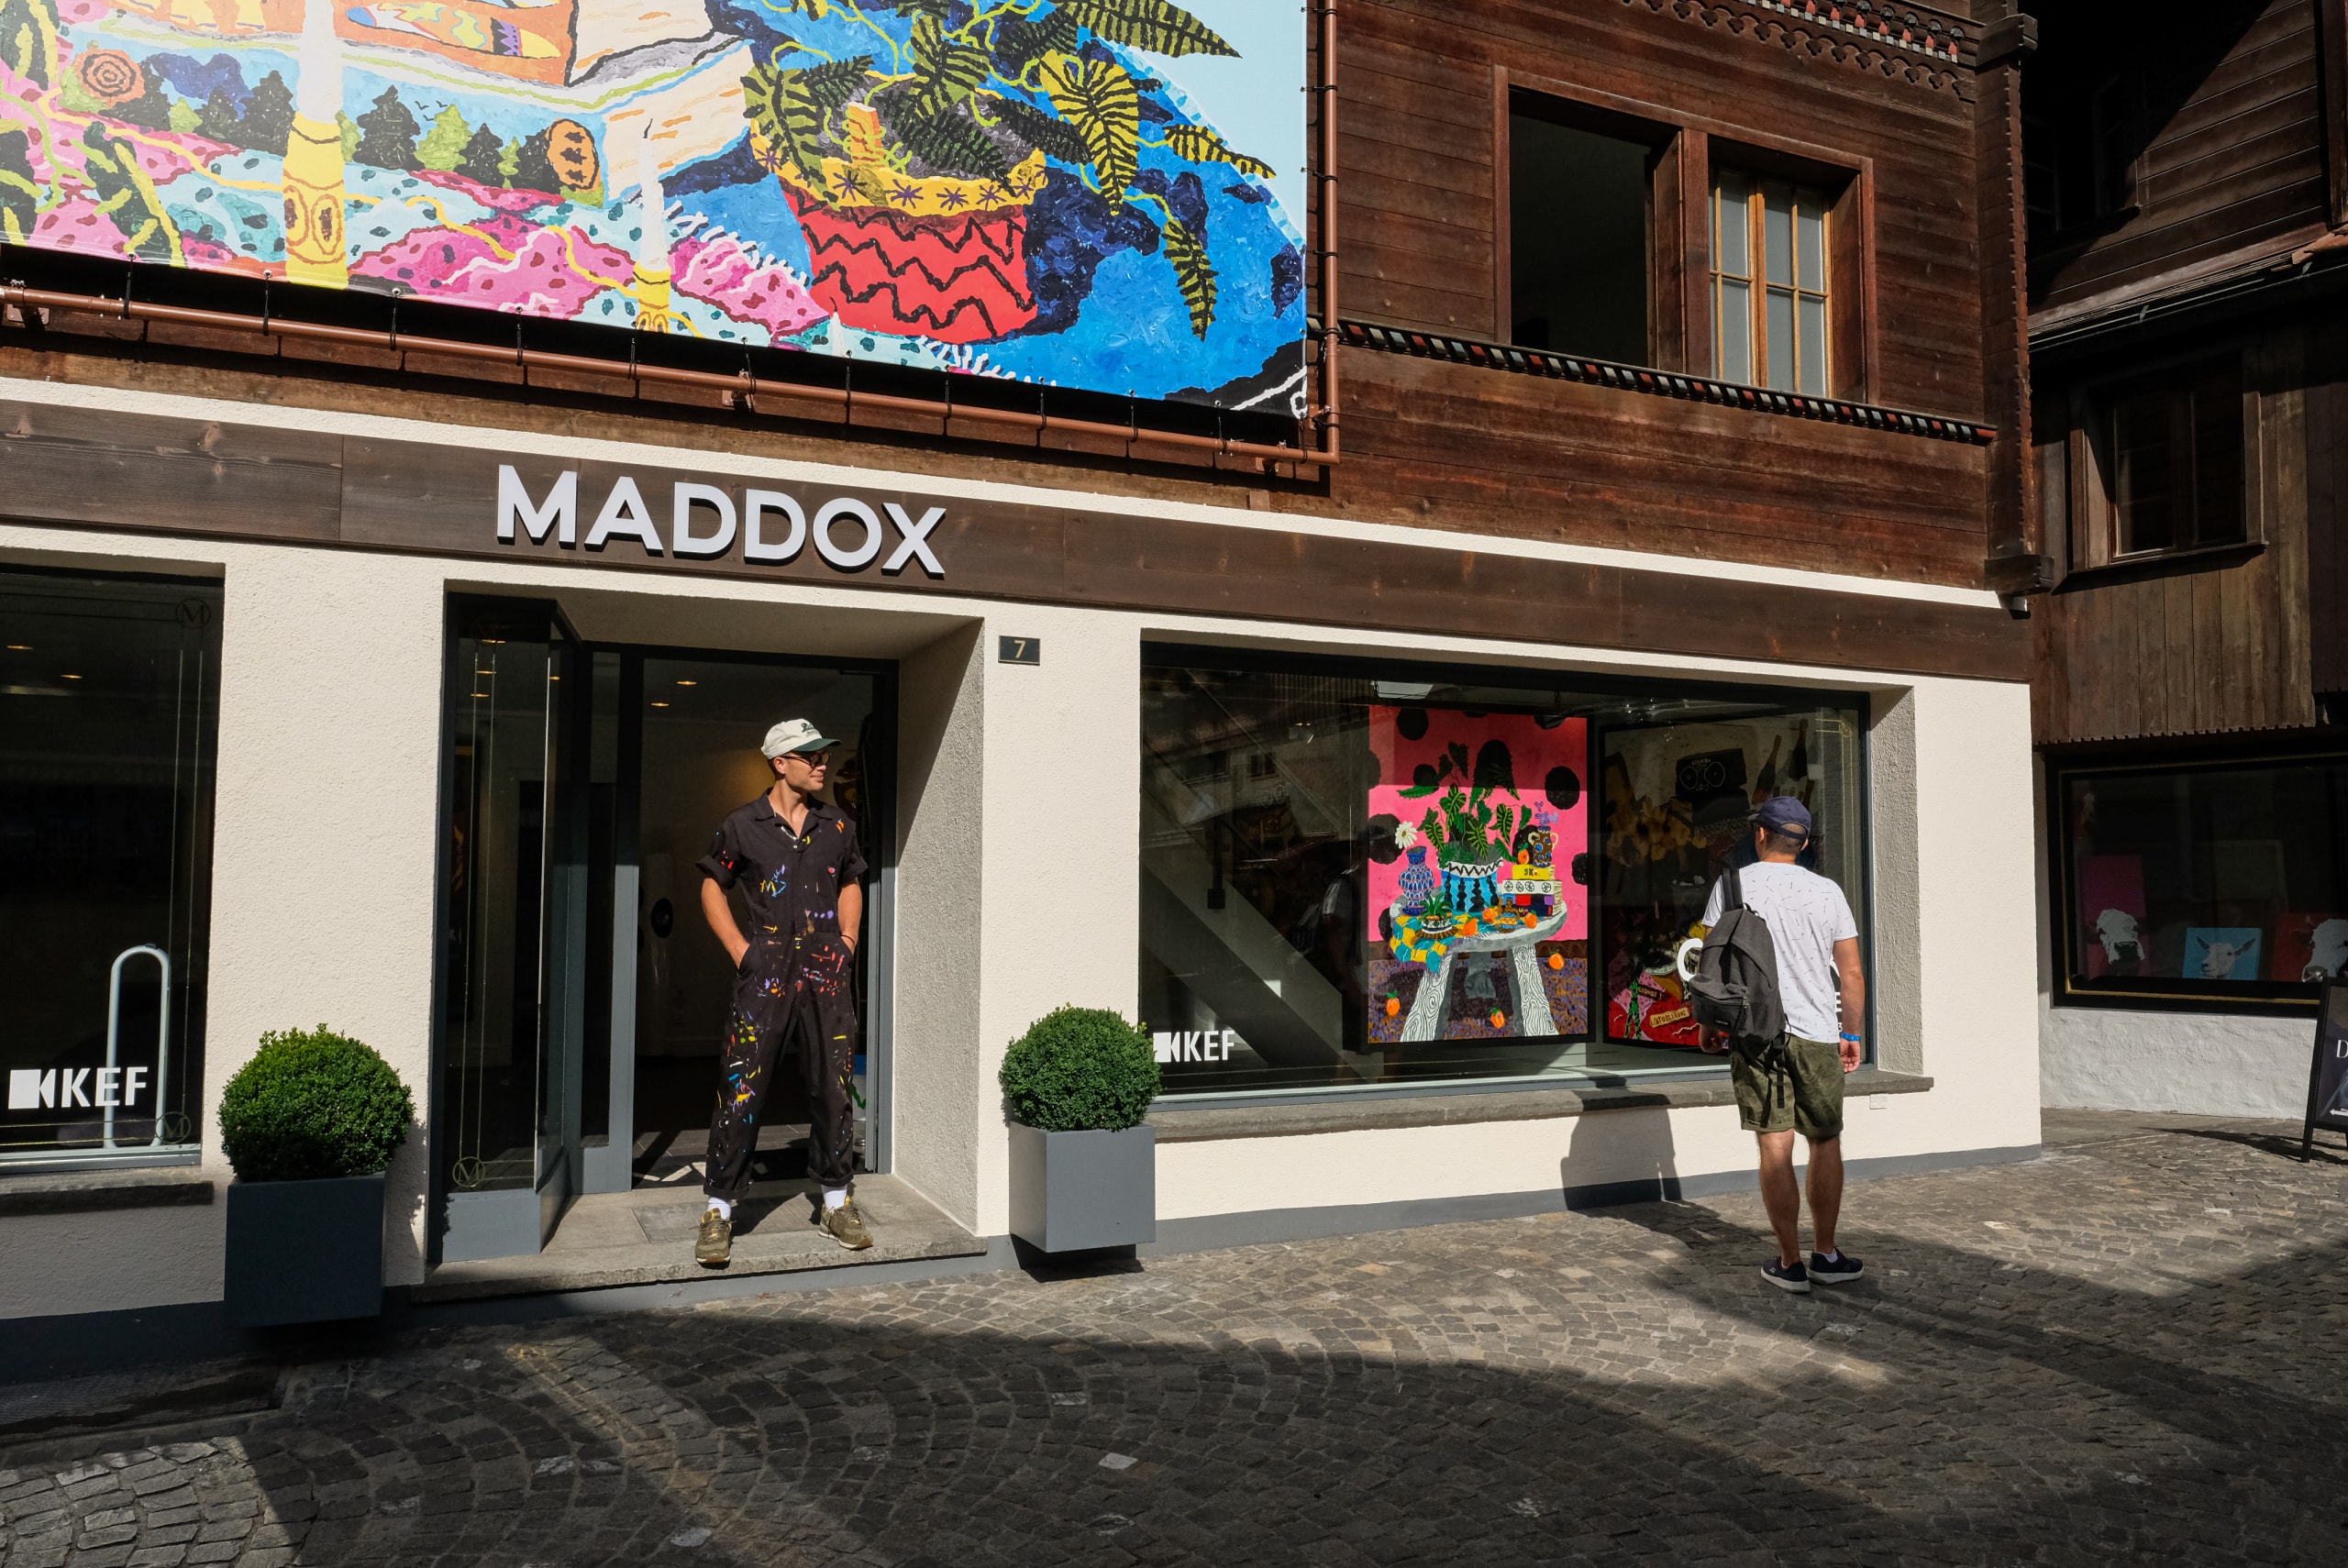 Cooper Wild Life Exhibition Maddox Gallery Gstaad